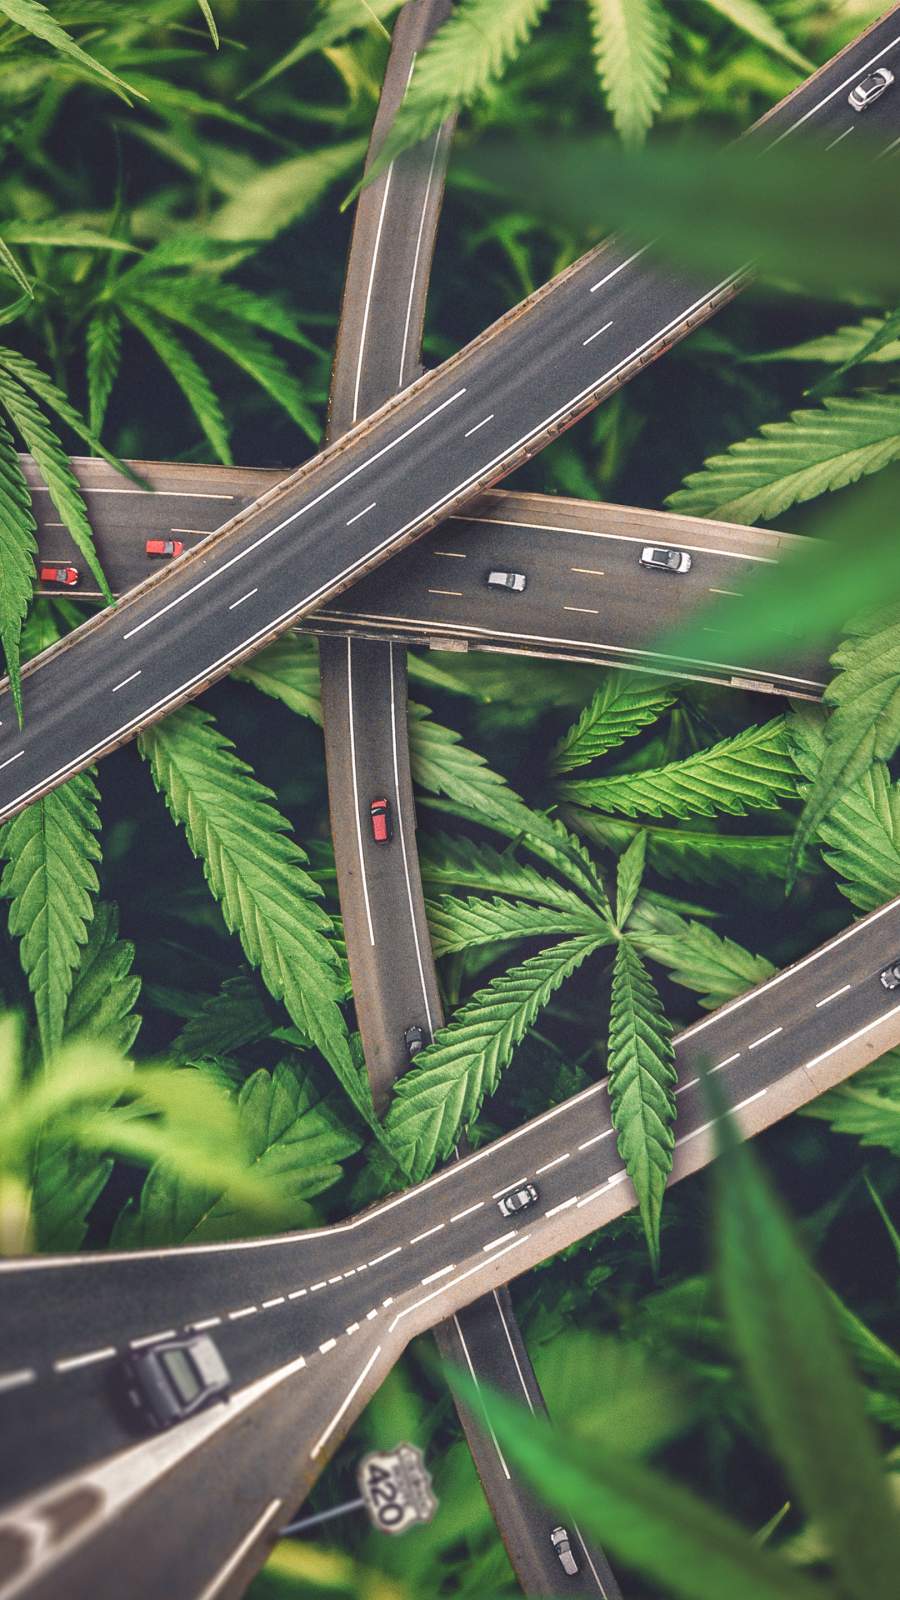 Weed Route iPhone Wallpaper Wallpaper, iPhone Wallpaper